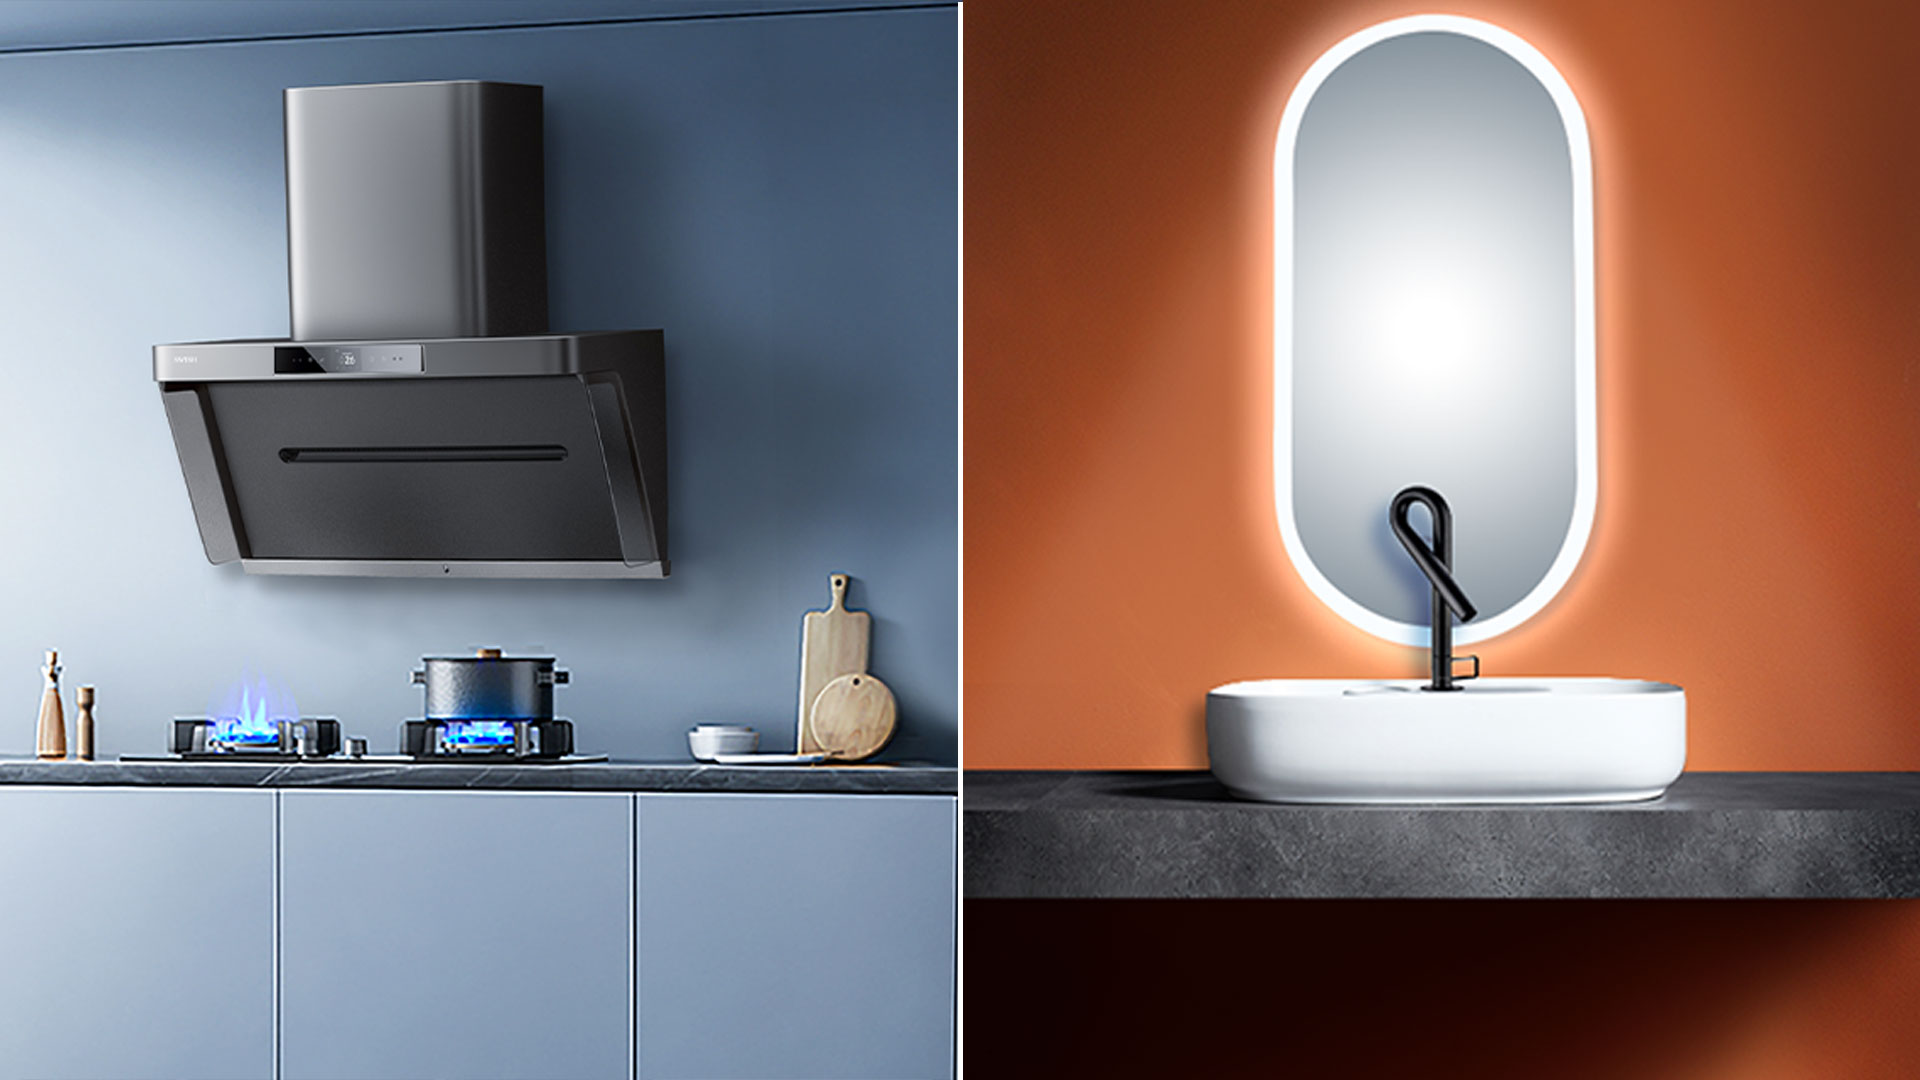 Unlock Your Style: 5 Expert Tips to Confidently Select Your Perfect Bath and Kitchen Essentials